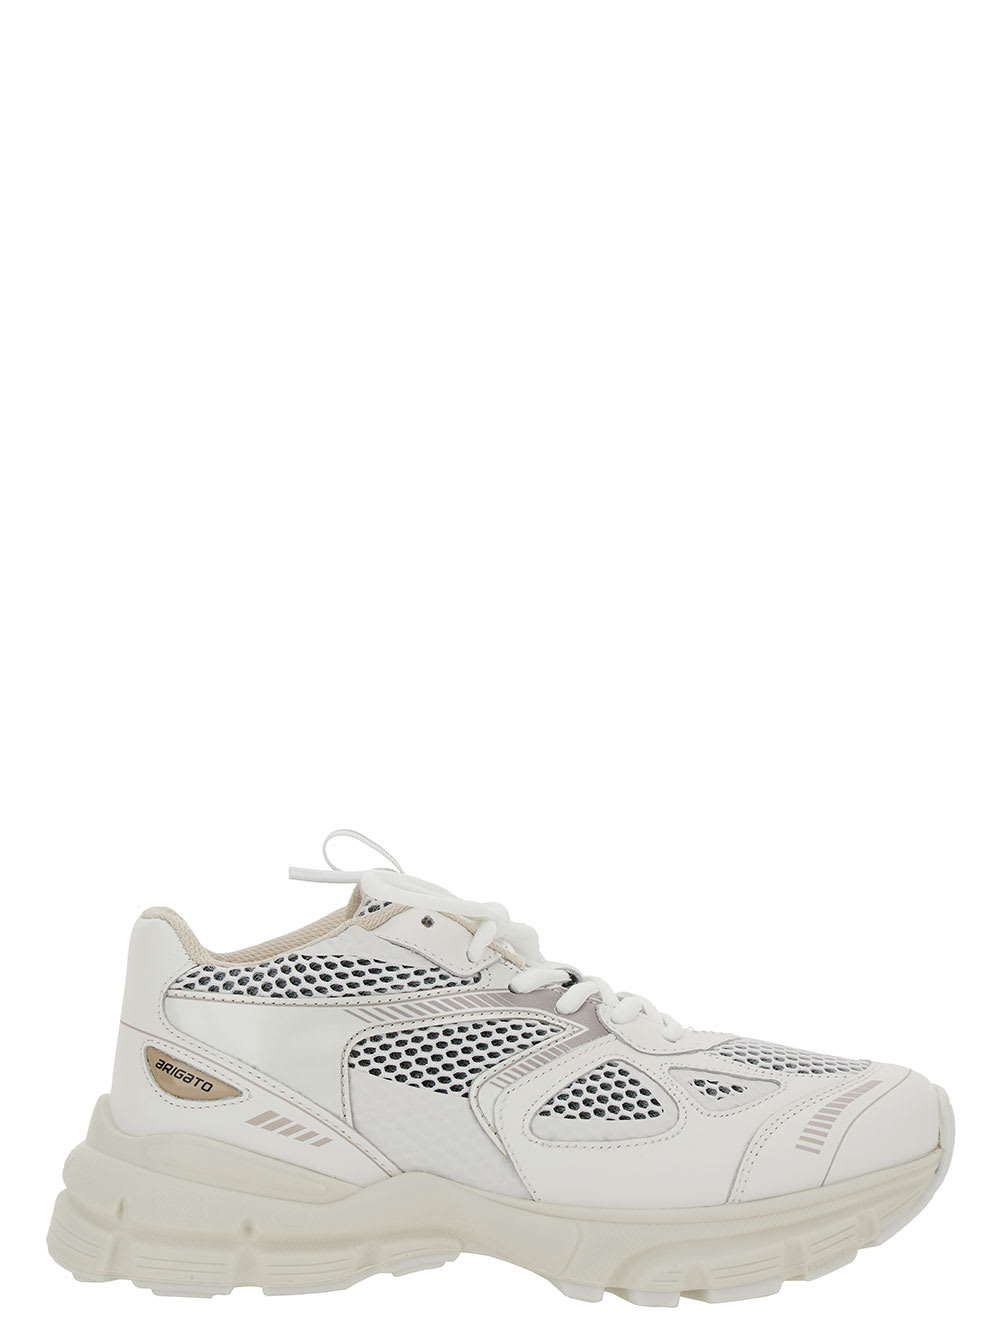 Axel Arigato Marathon Runner White Low Top Trainers With Reflective Details In Leather Blend Woman